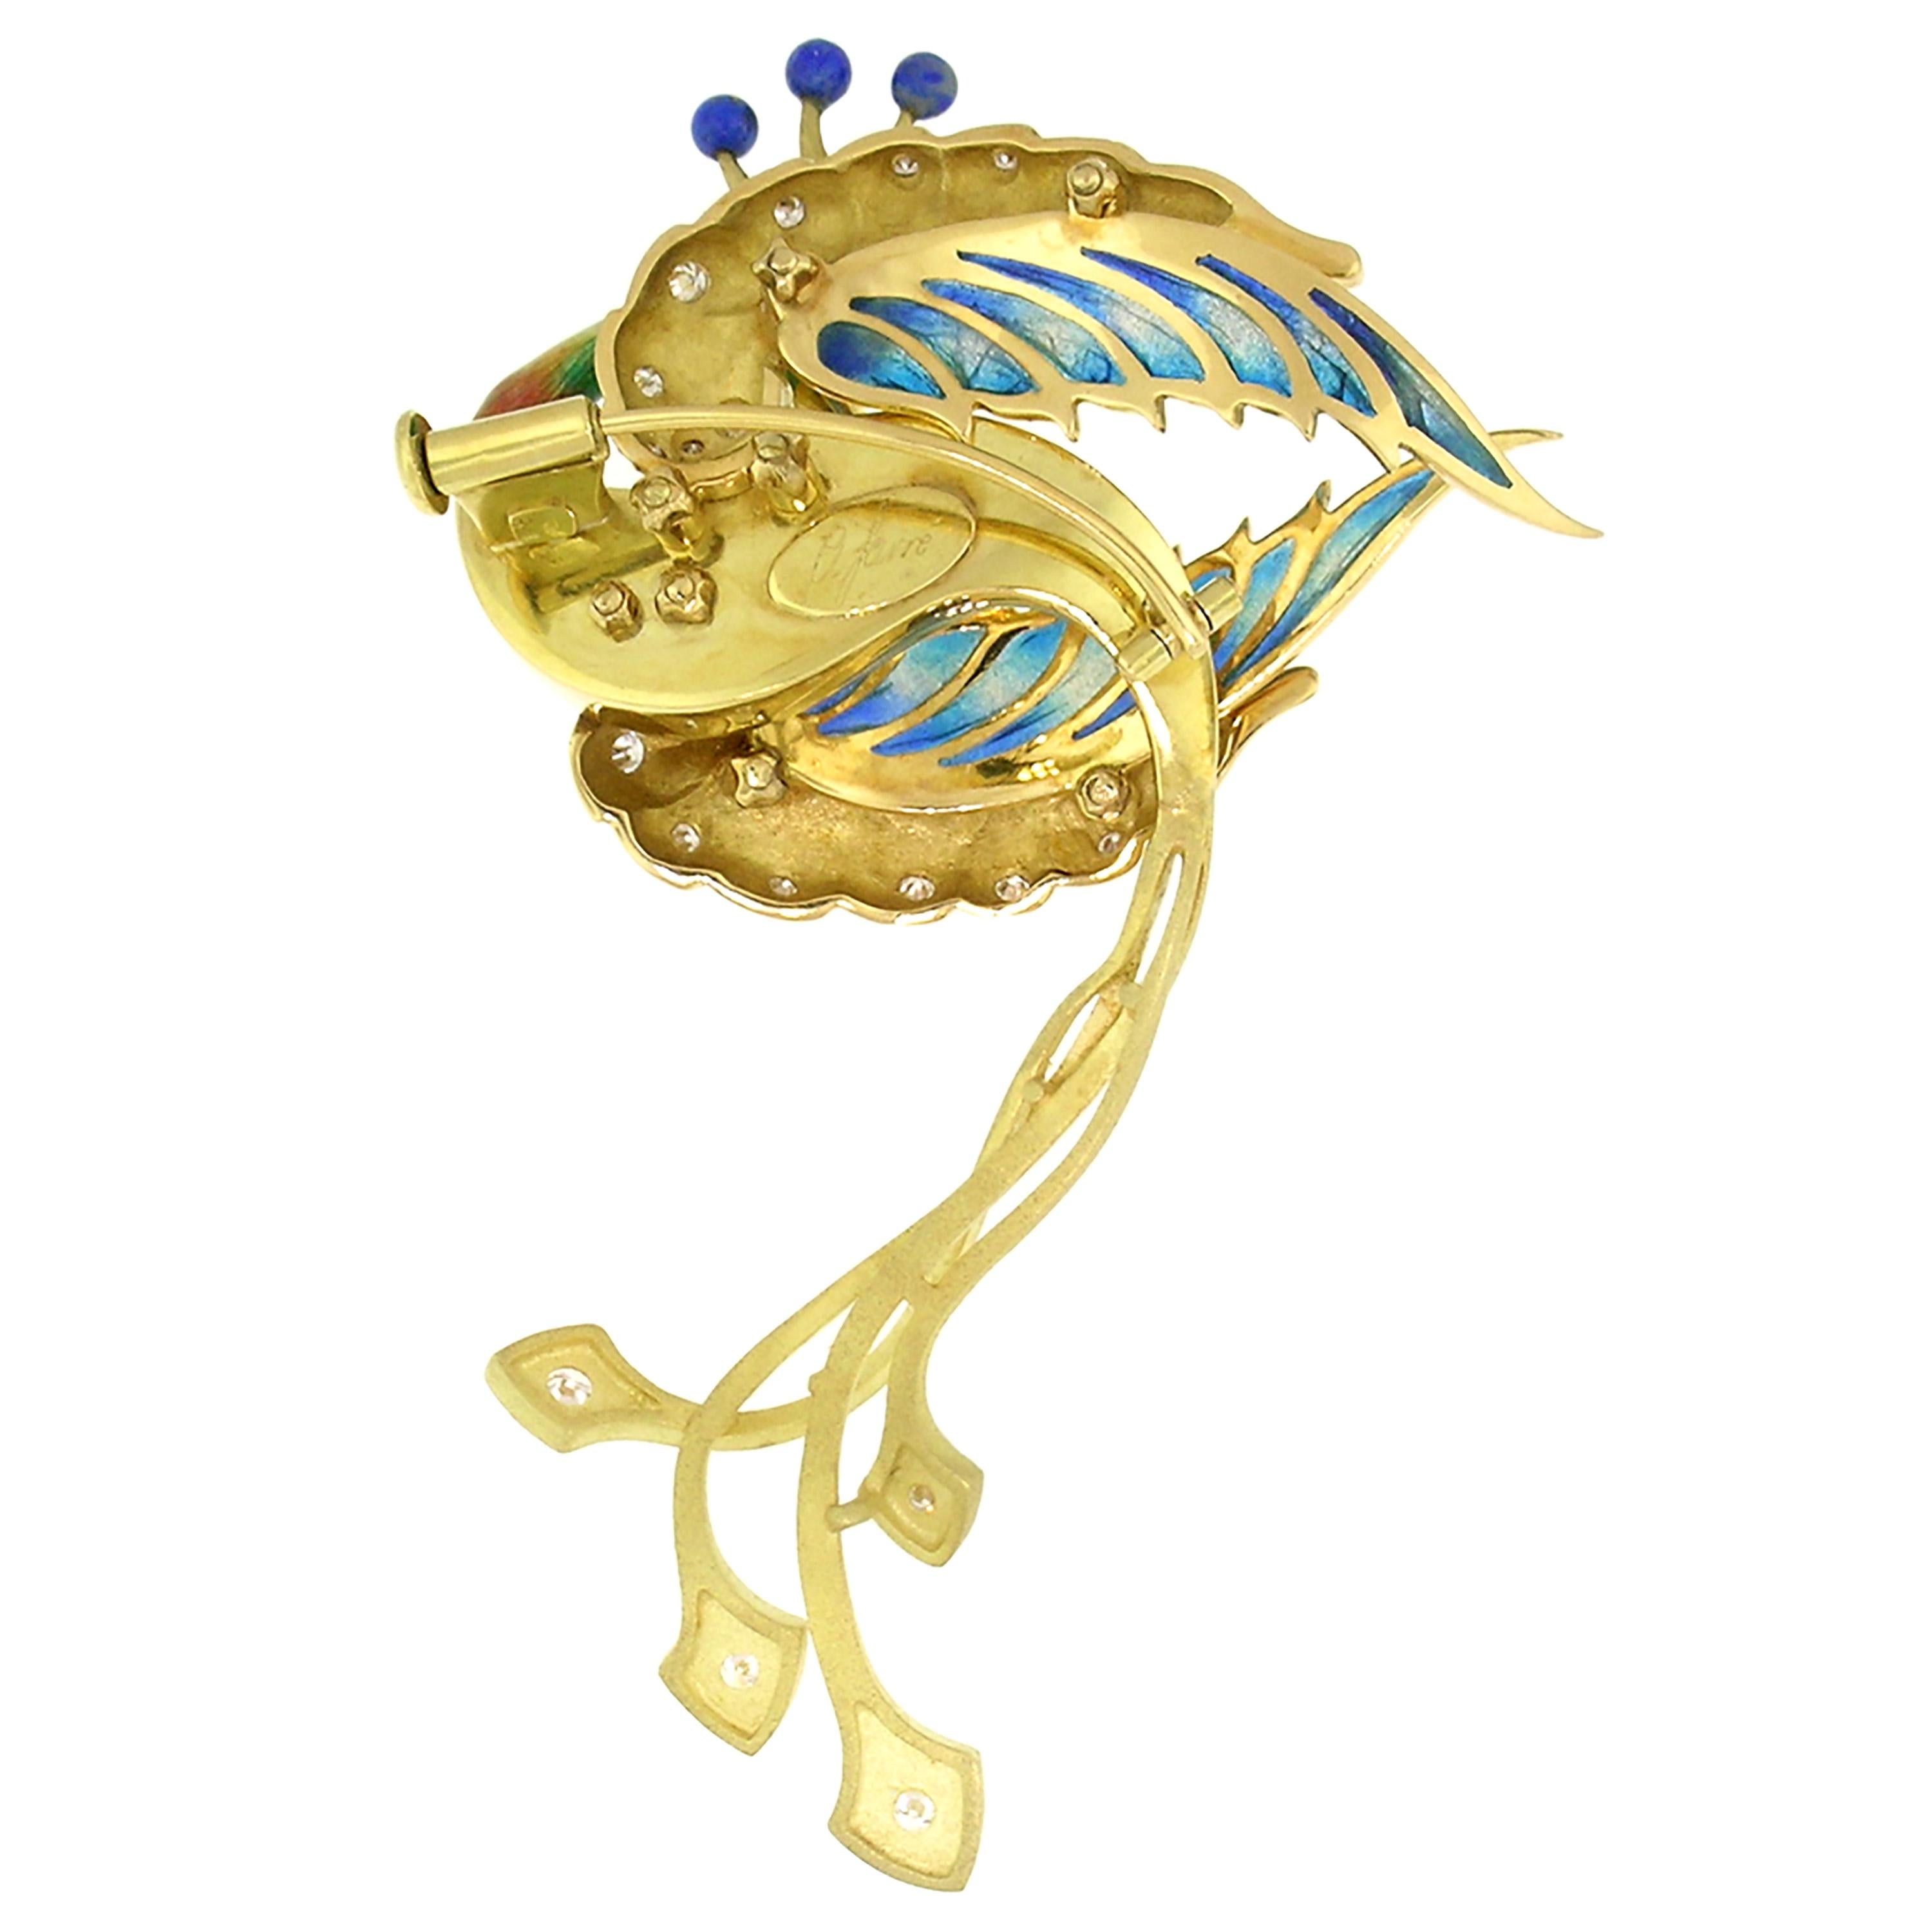 Round Cut Antoni Farré “Bird of Paradise” 18kt and Plique a Jour Brooch, Handmade in Spain